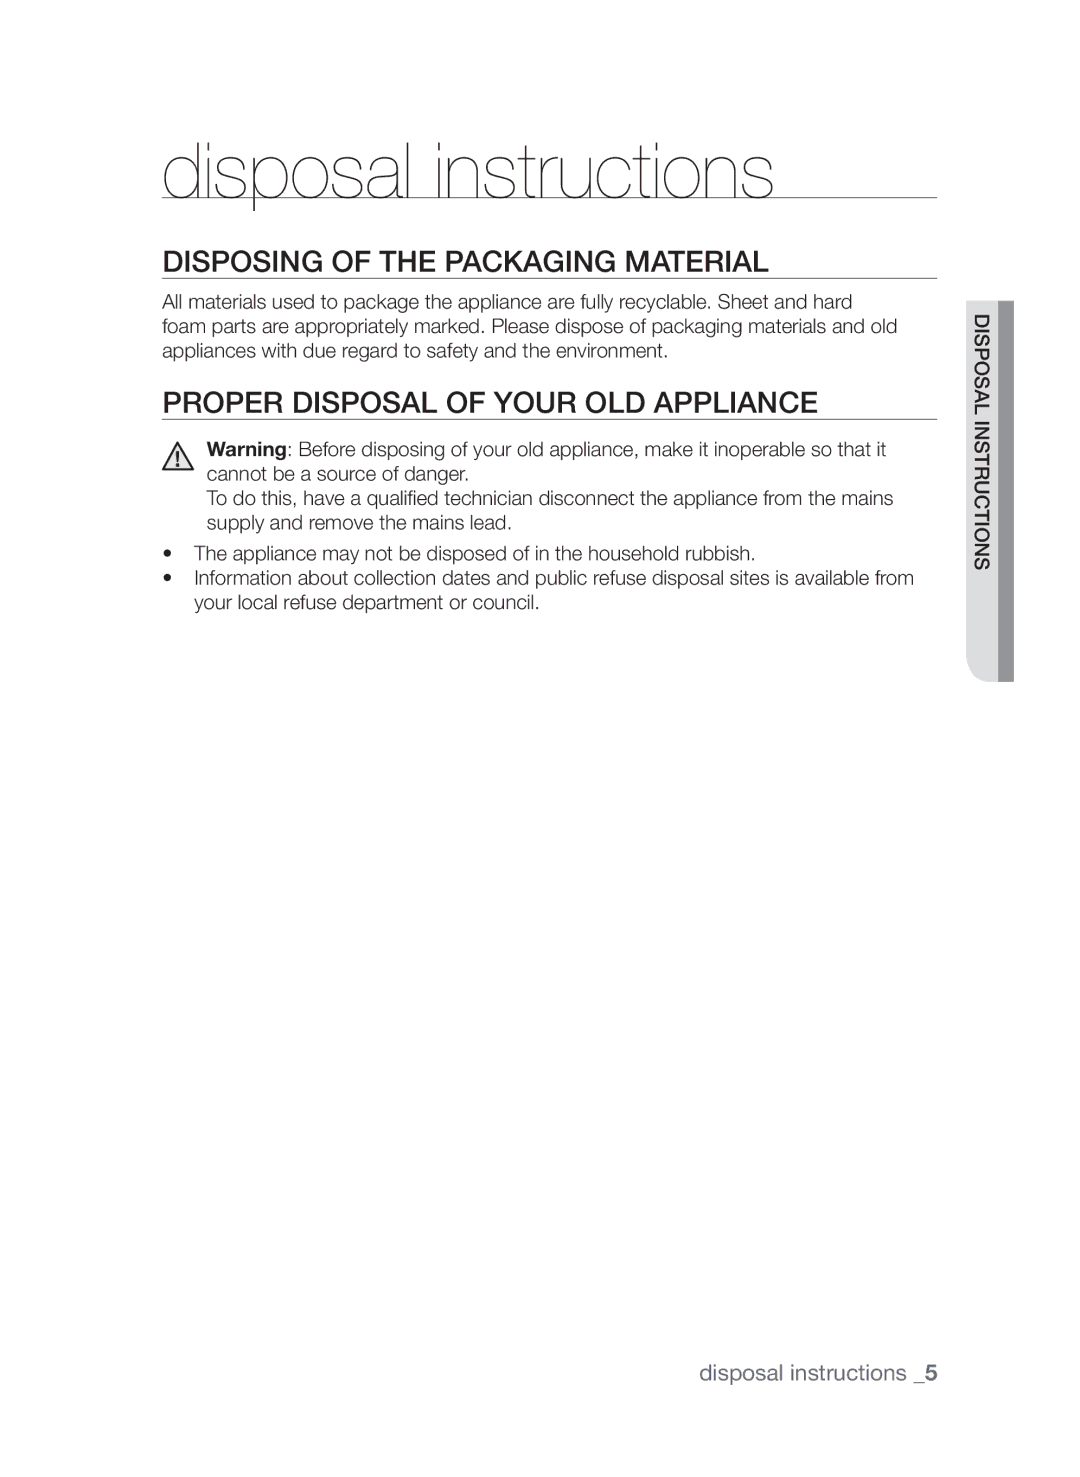 Samsung CTI613GIN/XEO Disposal instructions, Disposing of the packaging material, Proper disposal of your old appliance 